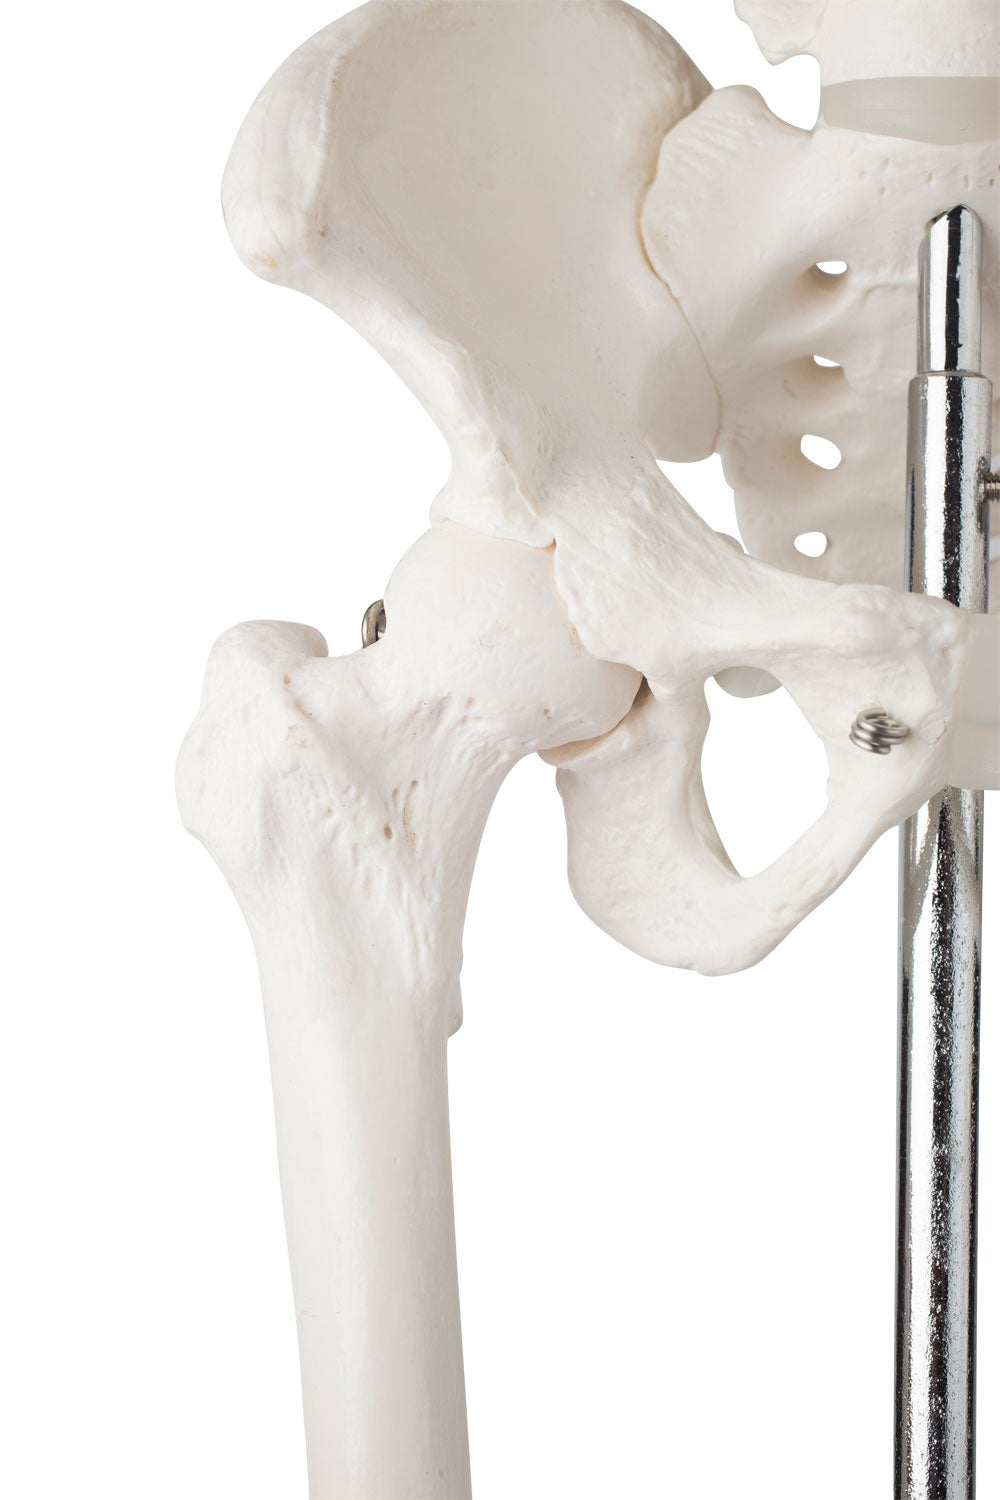 Skeleton model of 85 cm with a high degree of detail